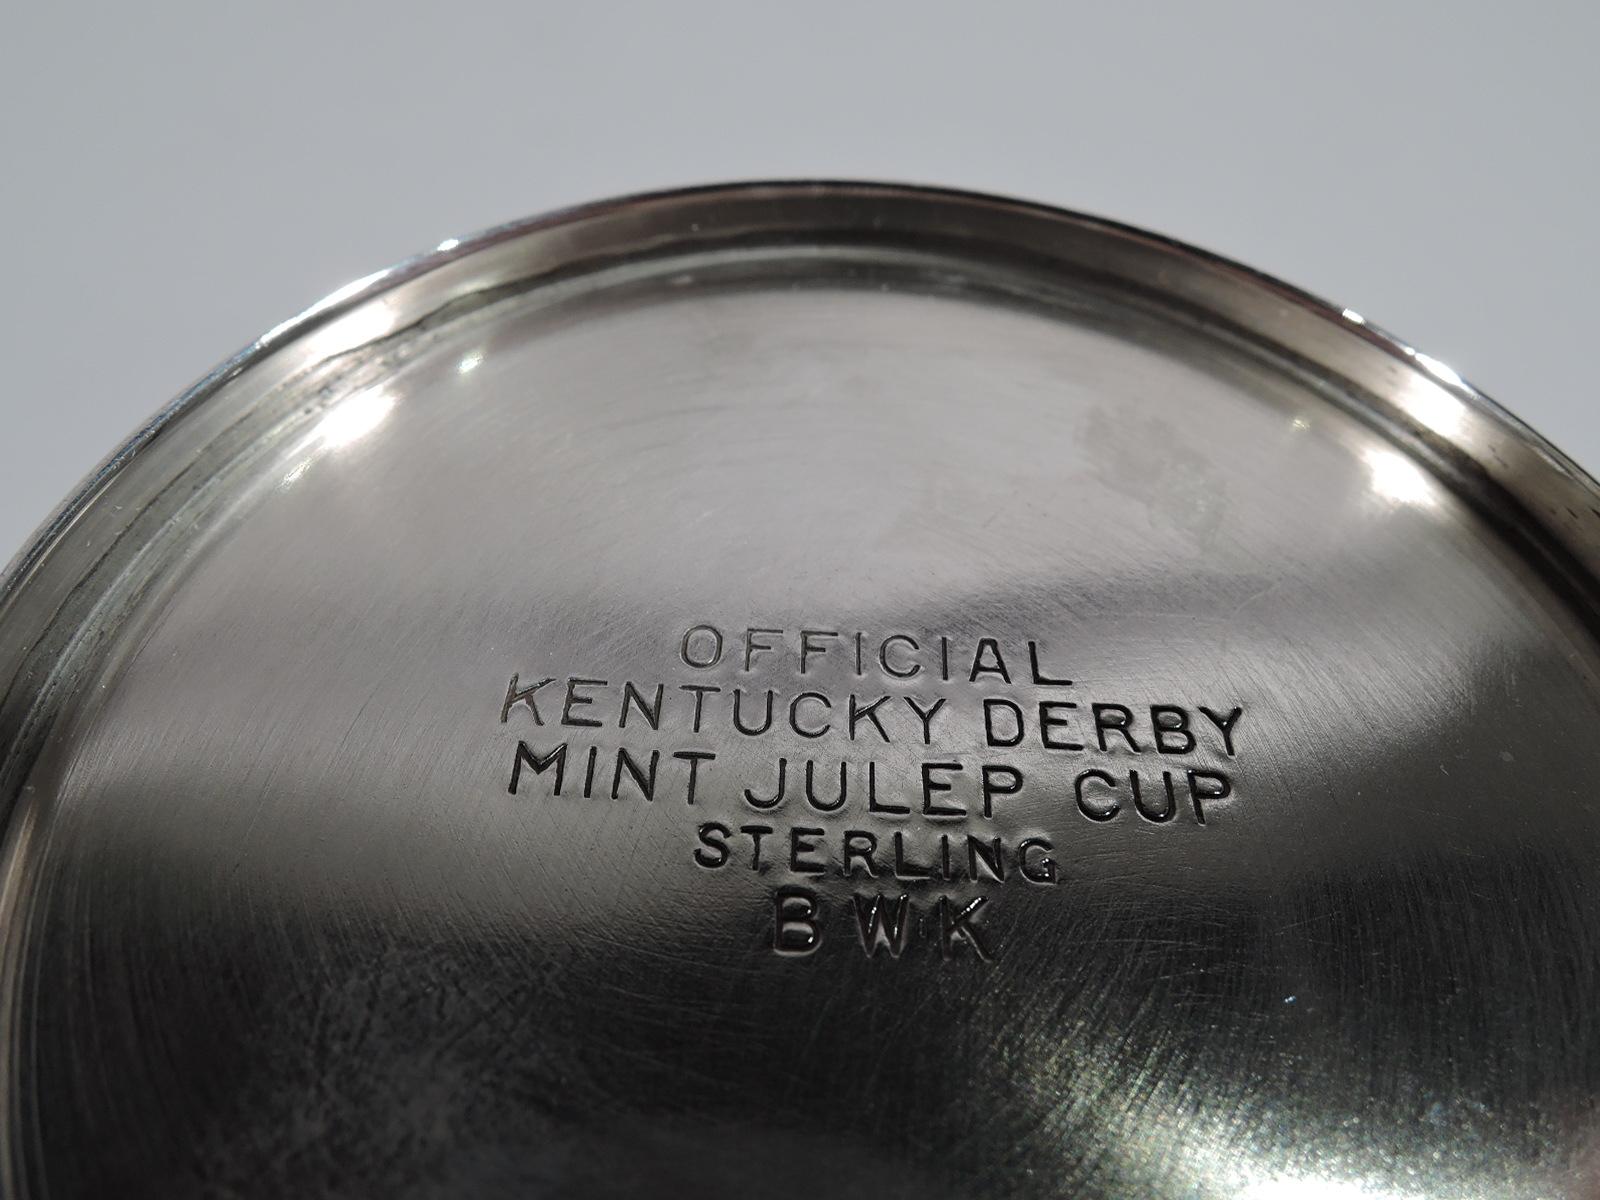 American Get Ready for Kentucky Derby with Official Mint Julep Cup